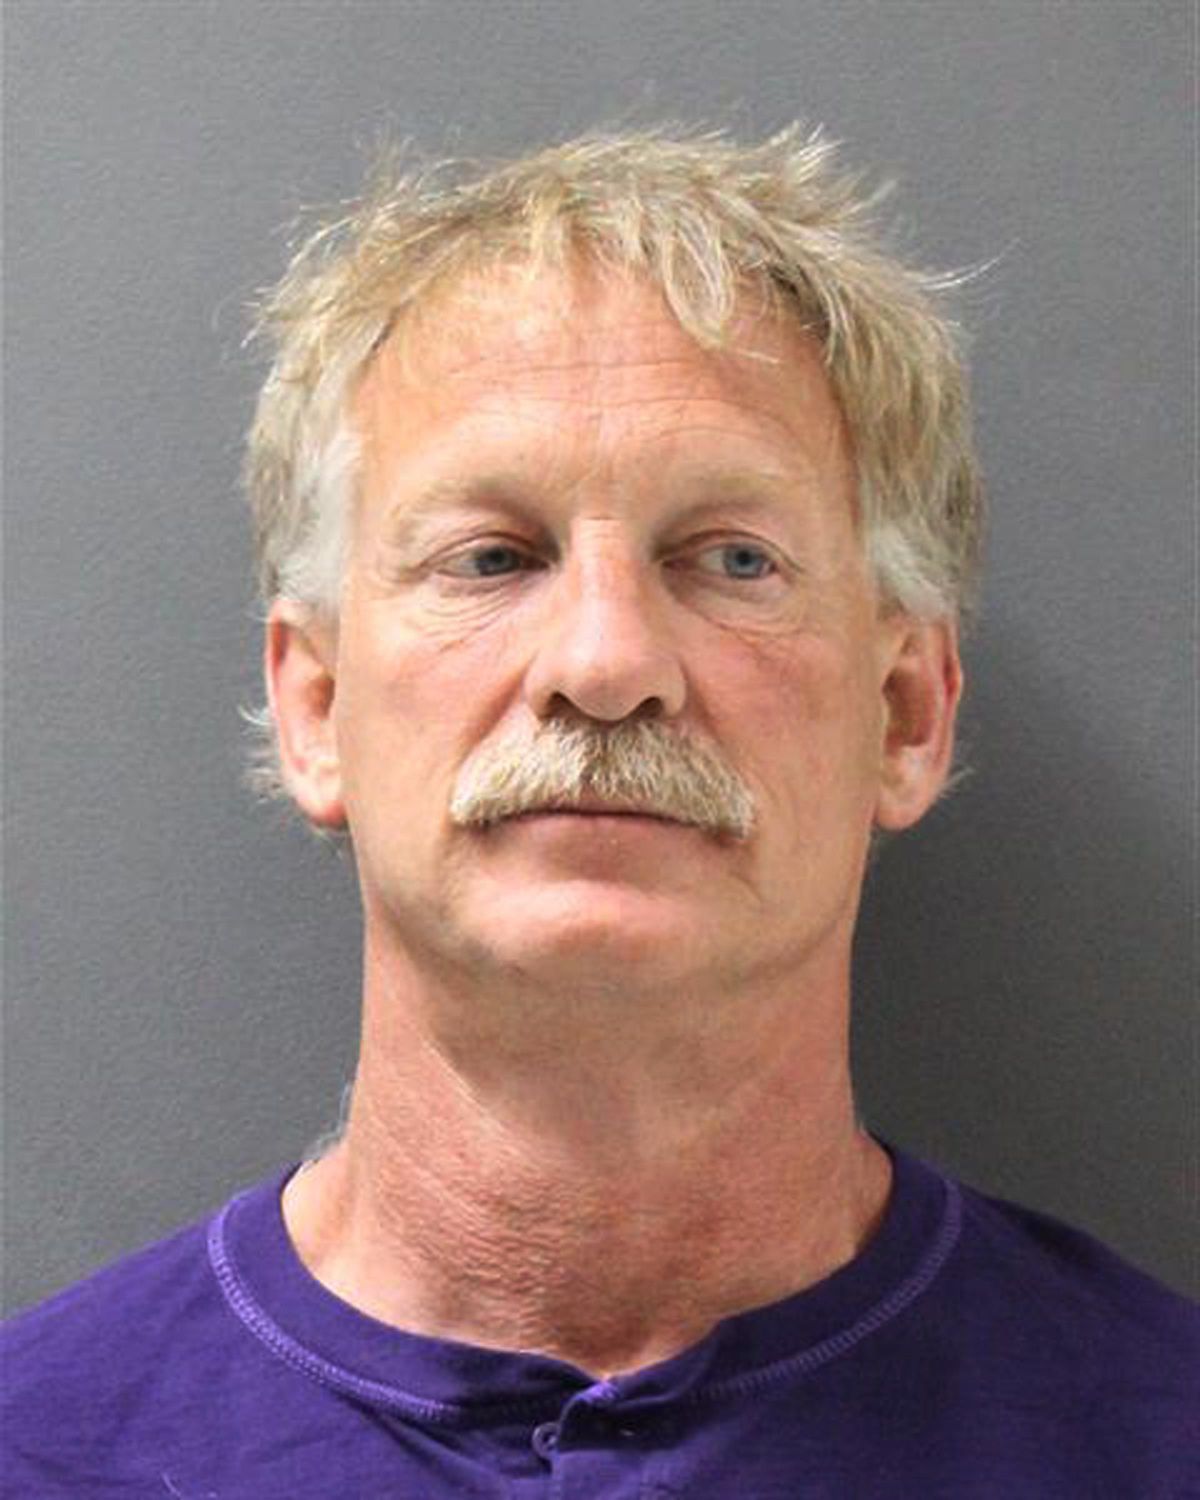 This photo released by the Yavapai County Sheriff’s Office shows suspect Gene Alan Carpenter, 54,  of Prescott Valley, Ariz., Carpenter, who is accused of flying a drone over a major Arizona wildfire, has been arrested, with authorities saying he interrupted firefighting efforts on a blaze that has forced thousands of people from their homes. The Yavapai County Sheriff’s Office said Saturday, July 1, 2017, that Carpenter  was in custody on charges of endangerment and unlawful operation of an unmanned aircraft. (Uncredited / Yavapai County Sheriff’s Office)